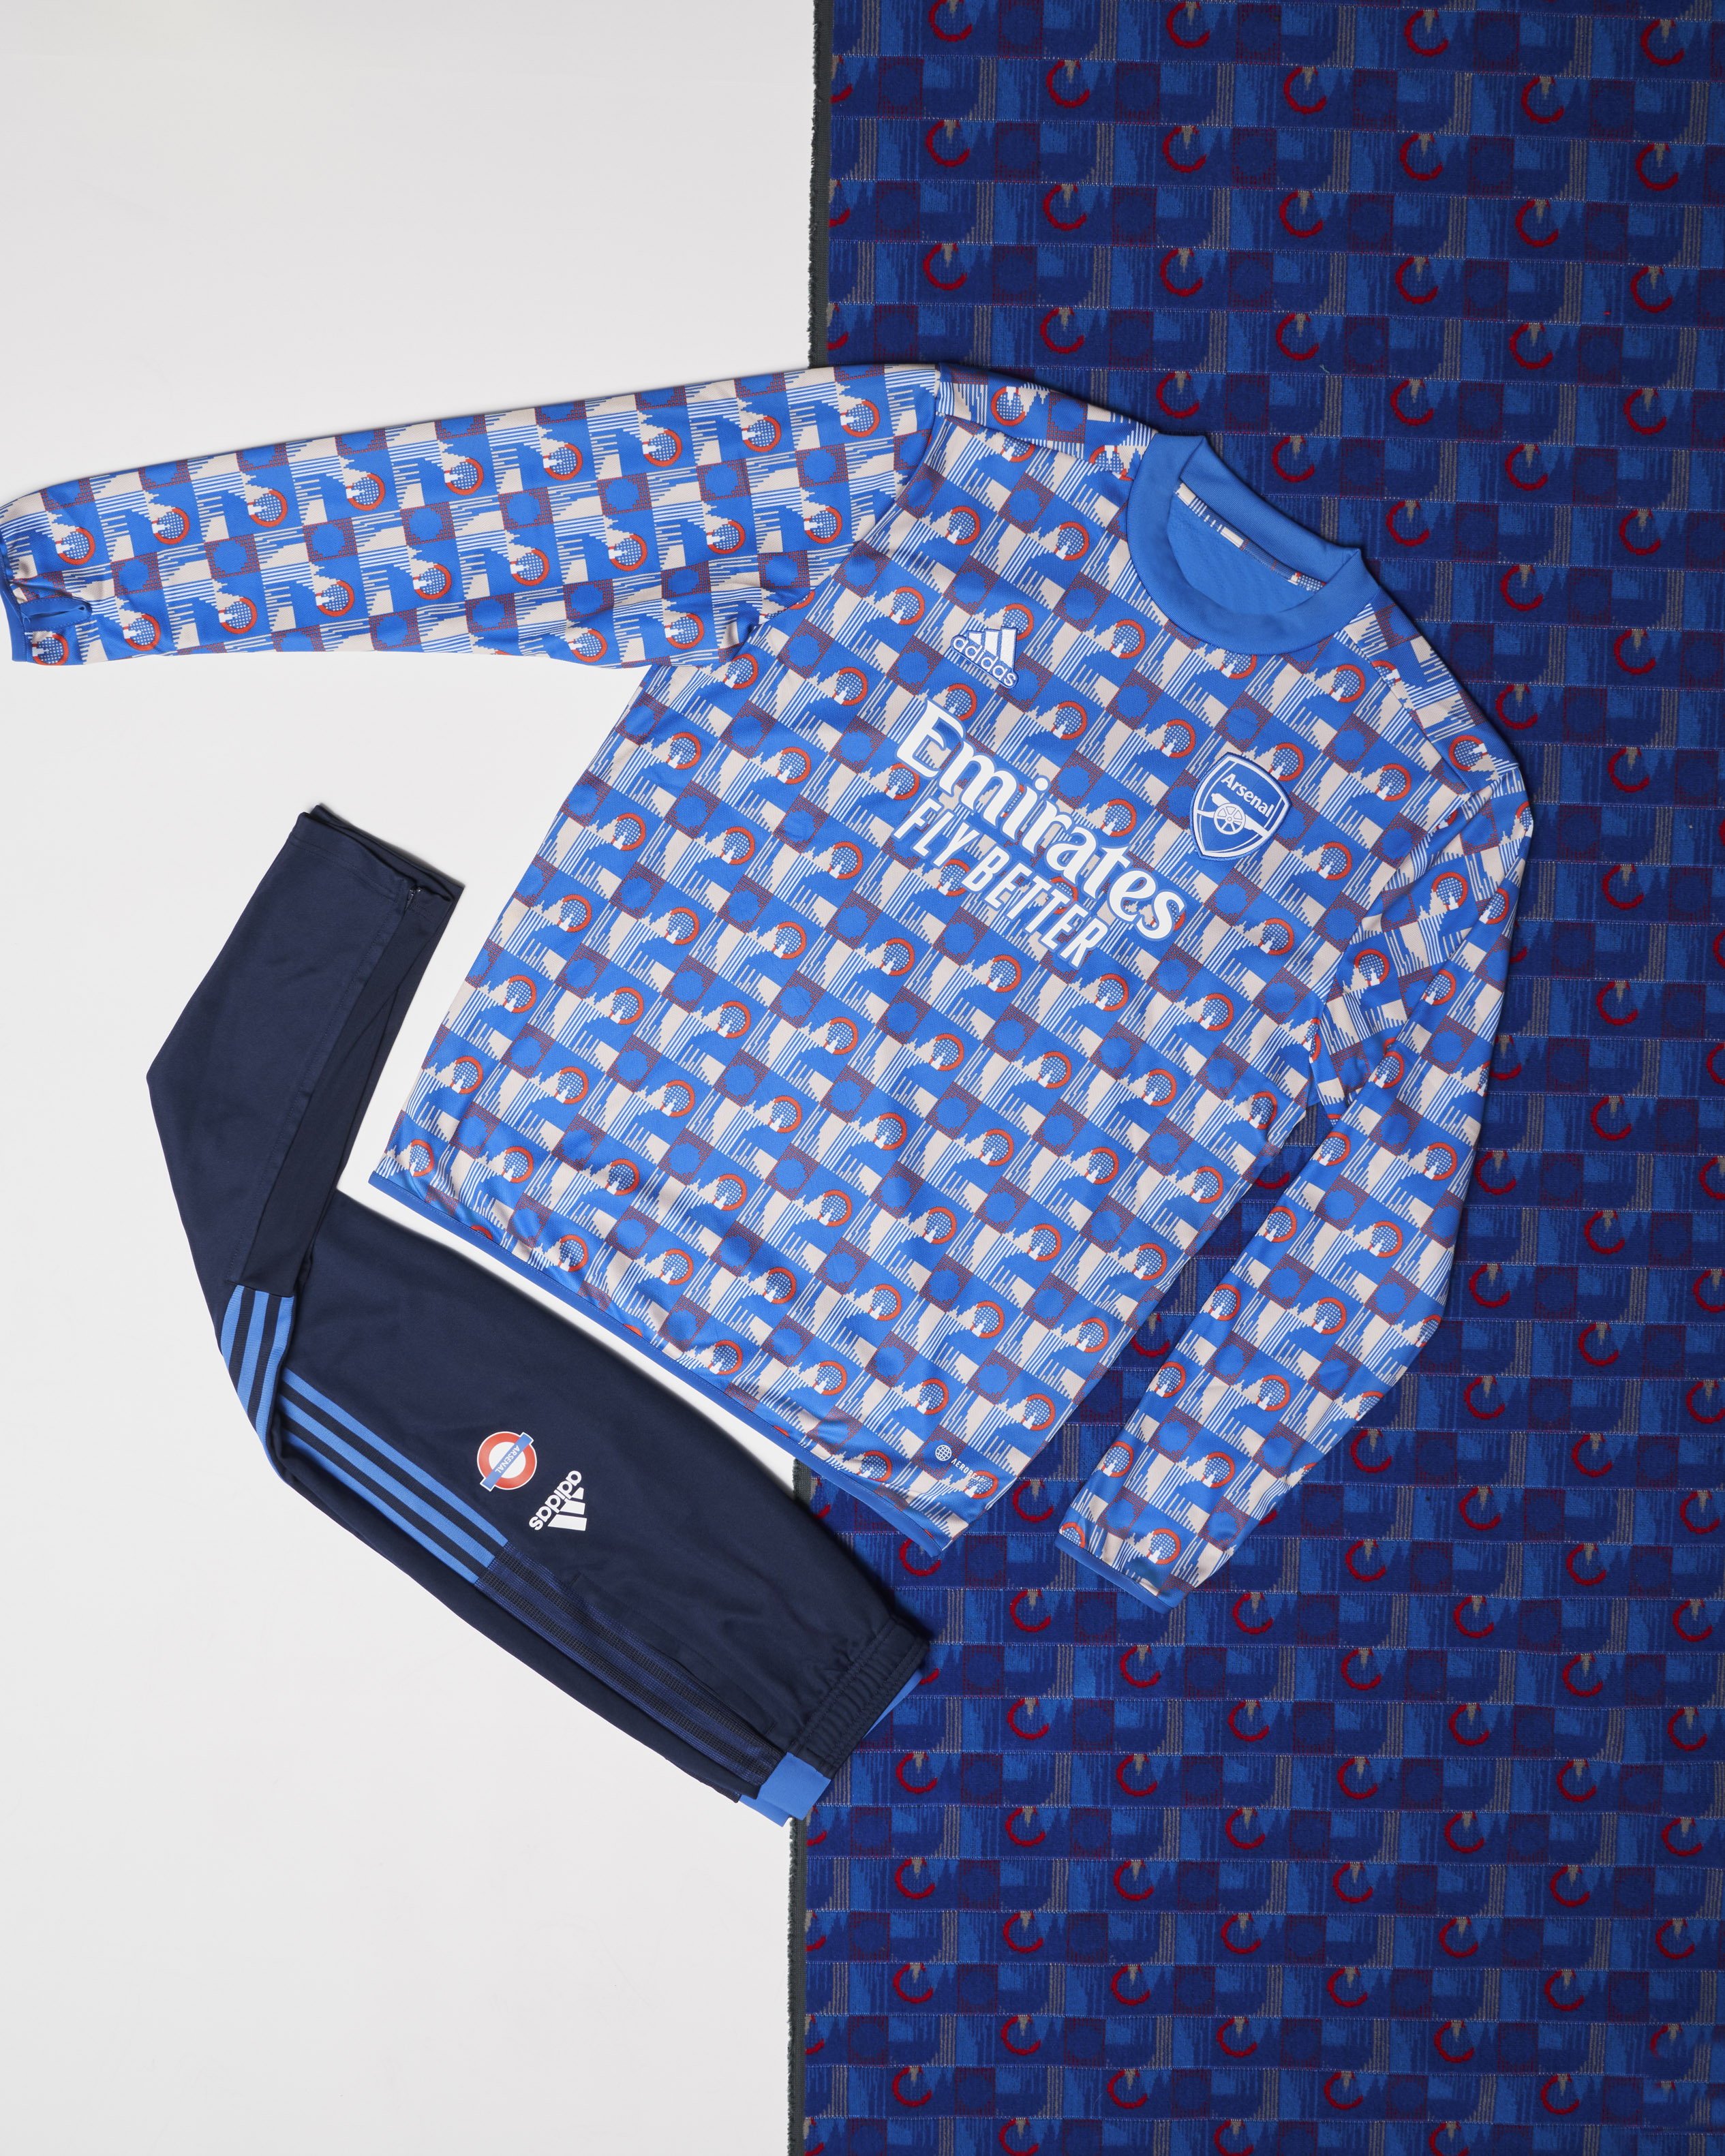 The new clothing range alongside the pattern used on Piccadilly line seats